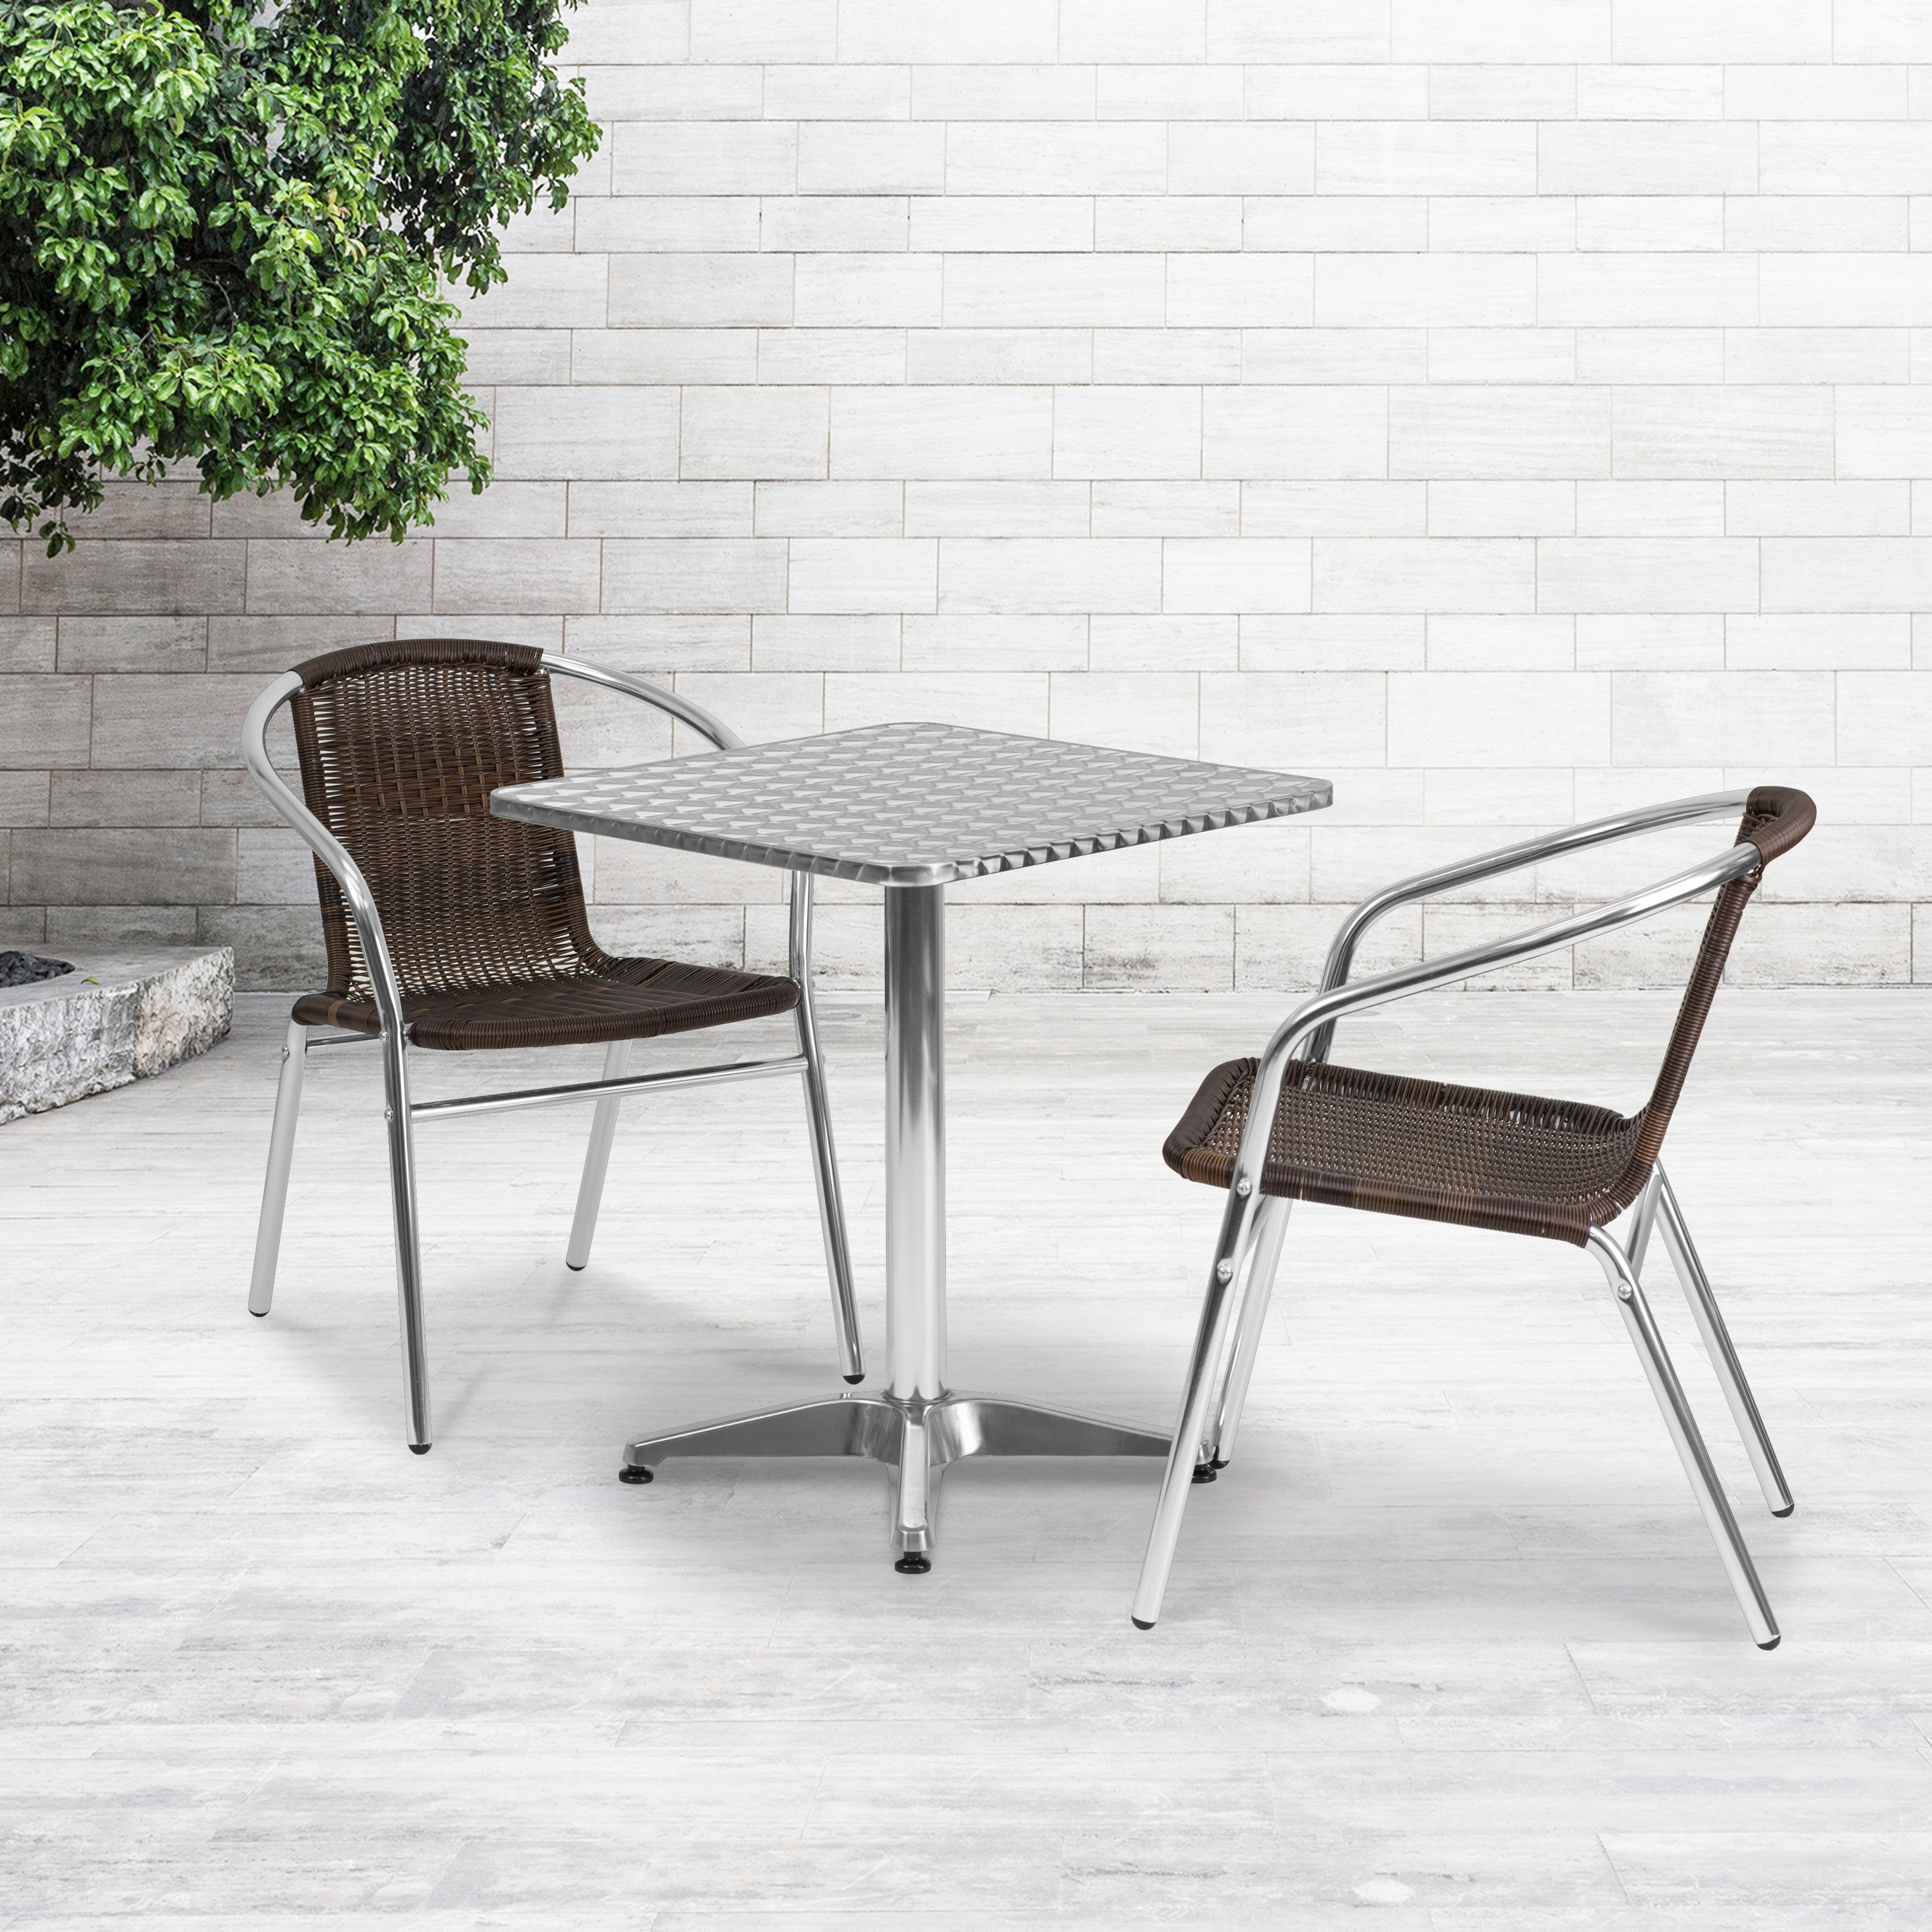 Flash Furniture Lila 23.5'' Square Aluminum Indoor-Outdoor Table Set with 2 Dark Brown Rattan Chairs - image 2 of 5